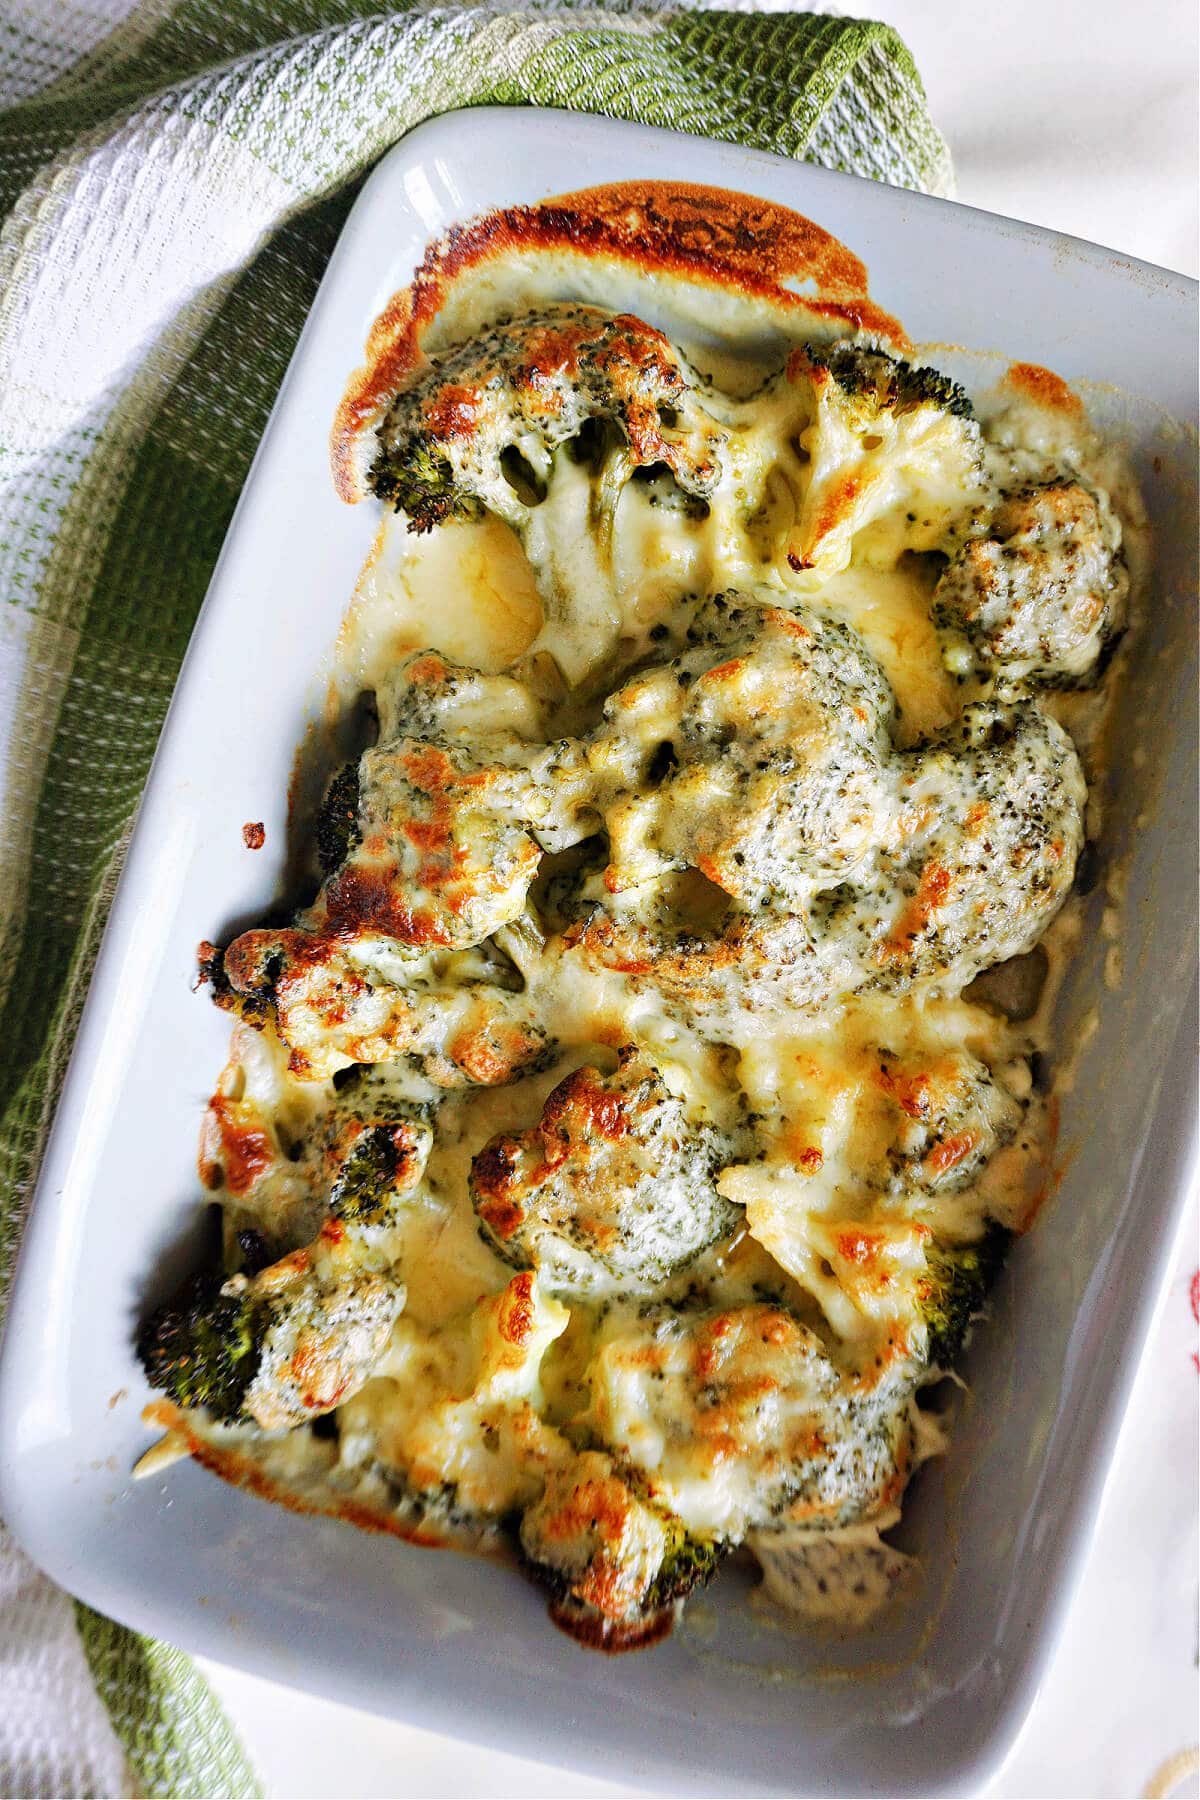 A dish with baked cheesy broccoli